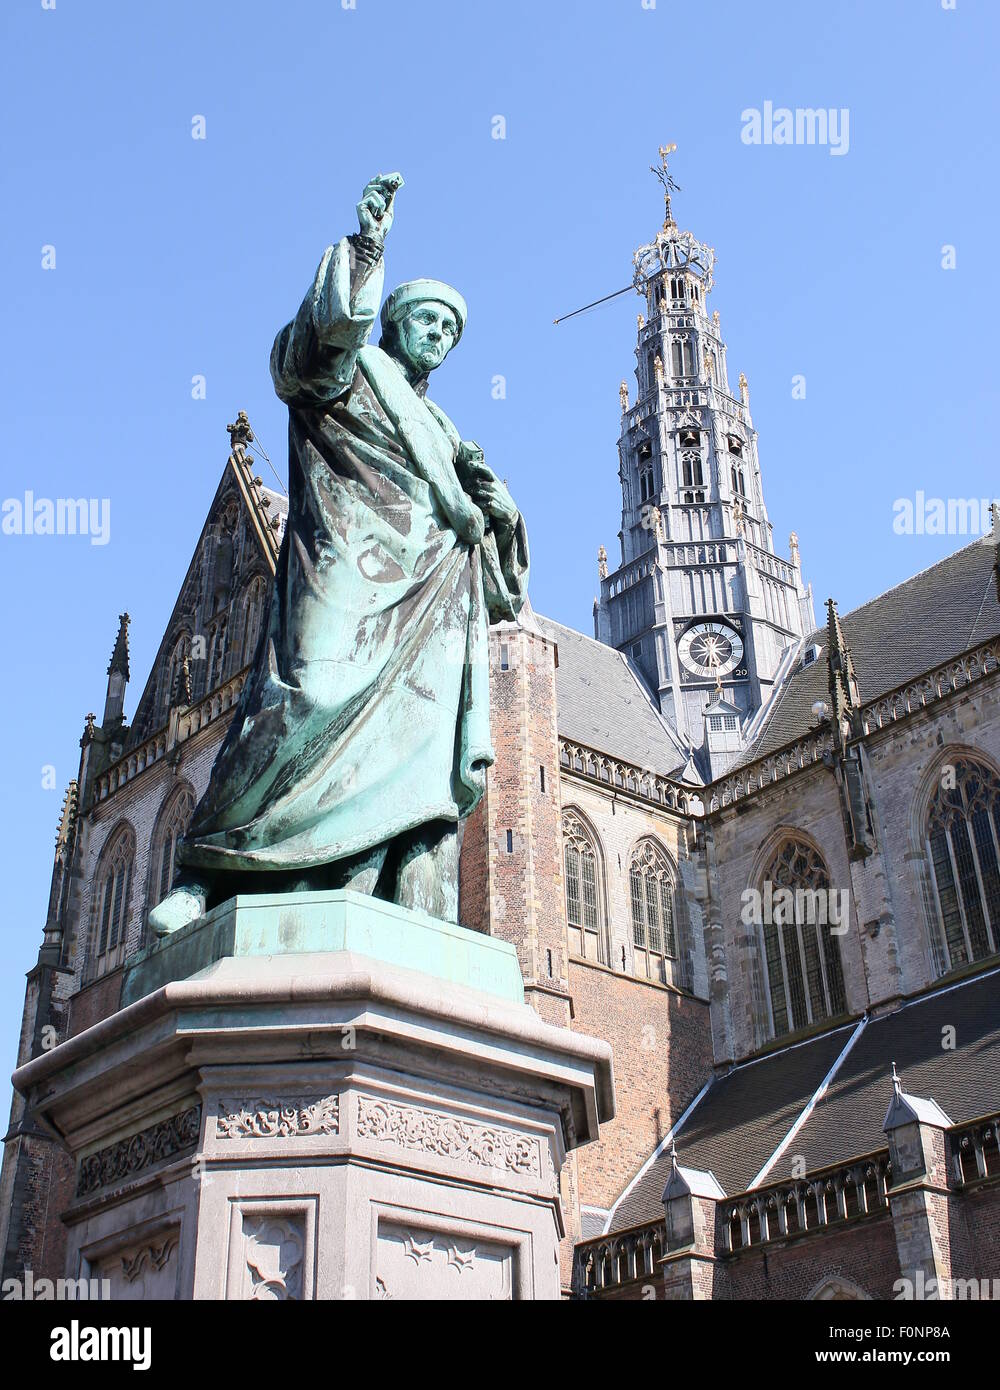 Grote or St Bavo church, Grote Markt square, Haarlem, Netherlands. Statue of Laurens Janszoon Coster, Dutch inventor of printing Stock Photo